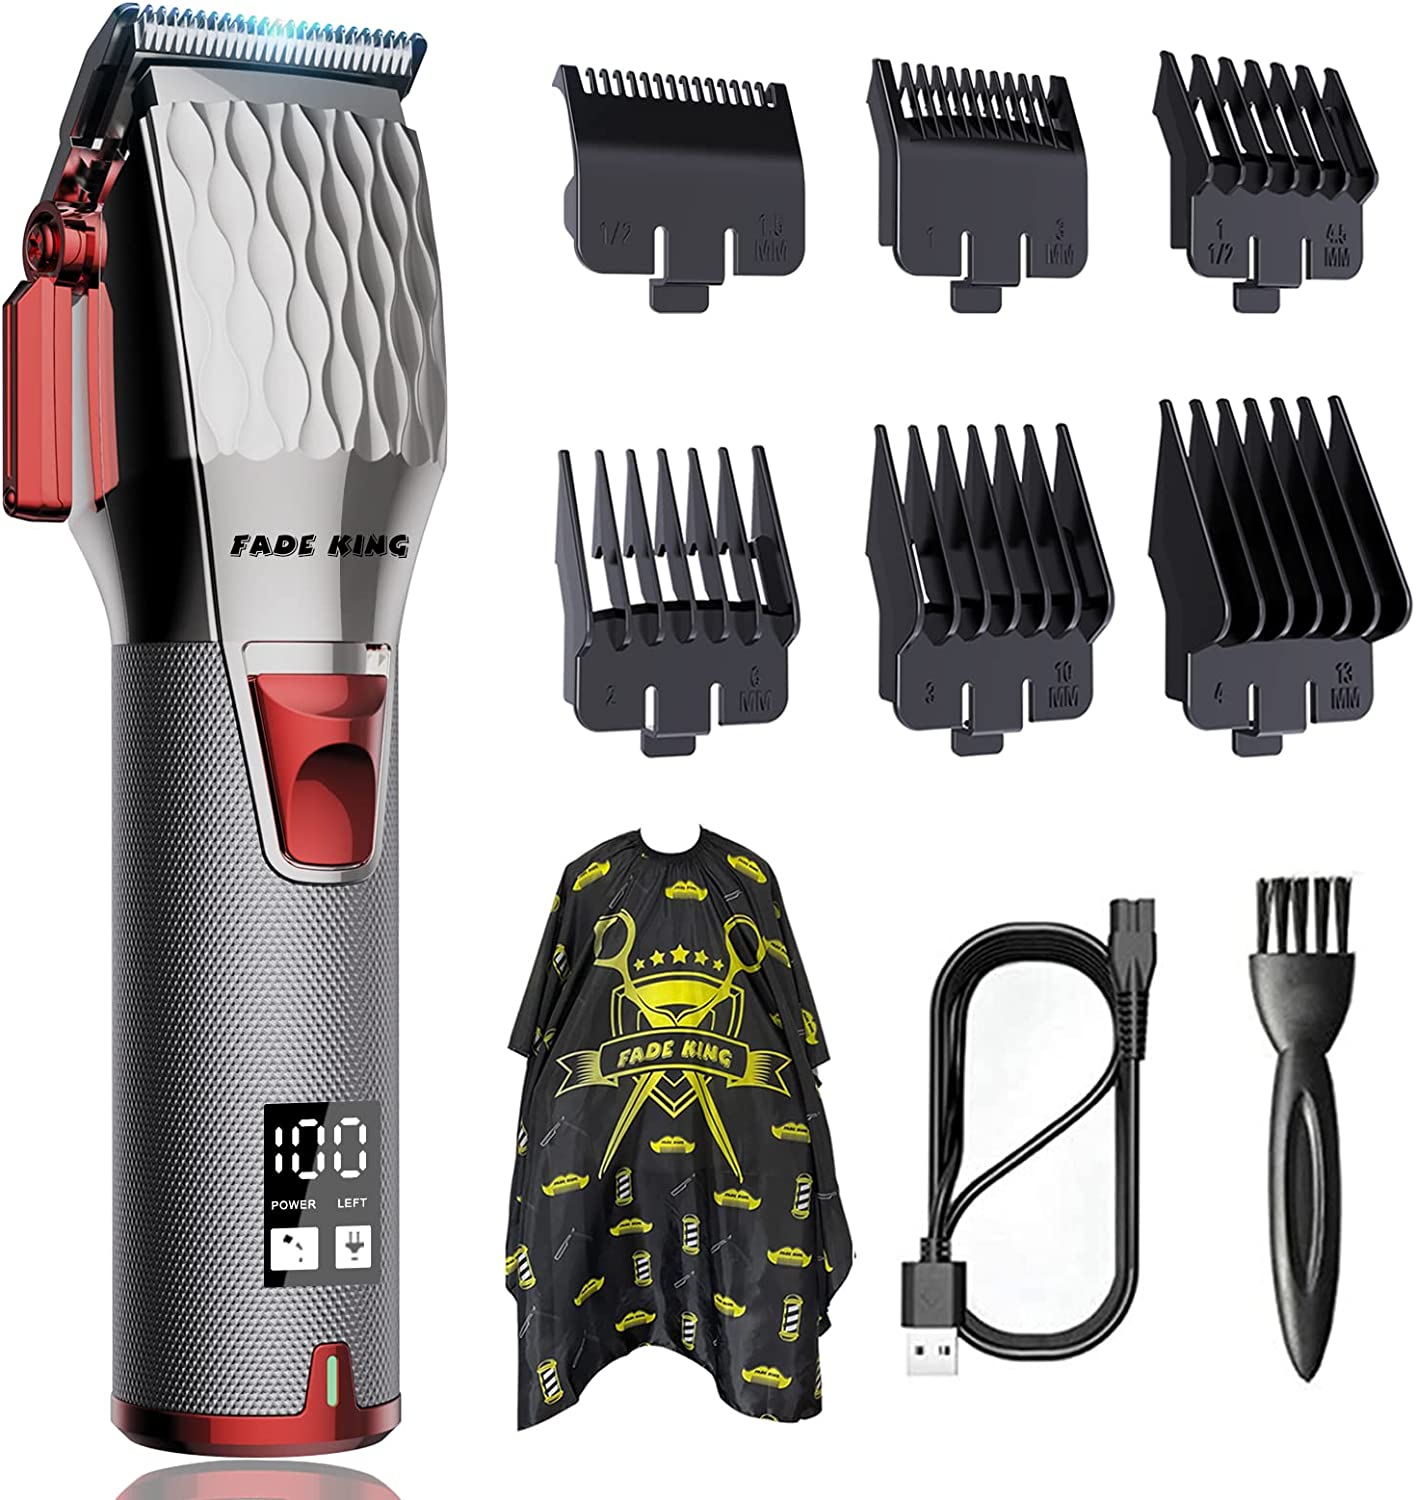 The Best Cordless Hair Clippers for Men, Tested by Professional Barbers